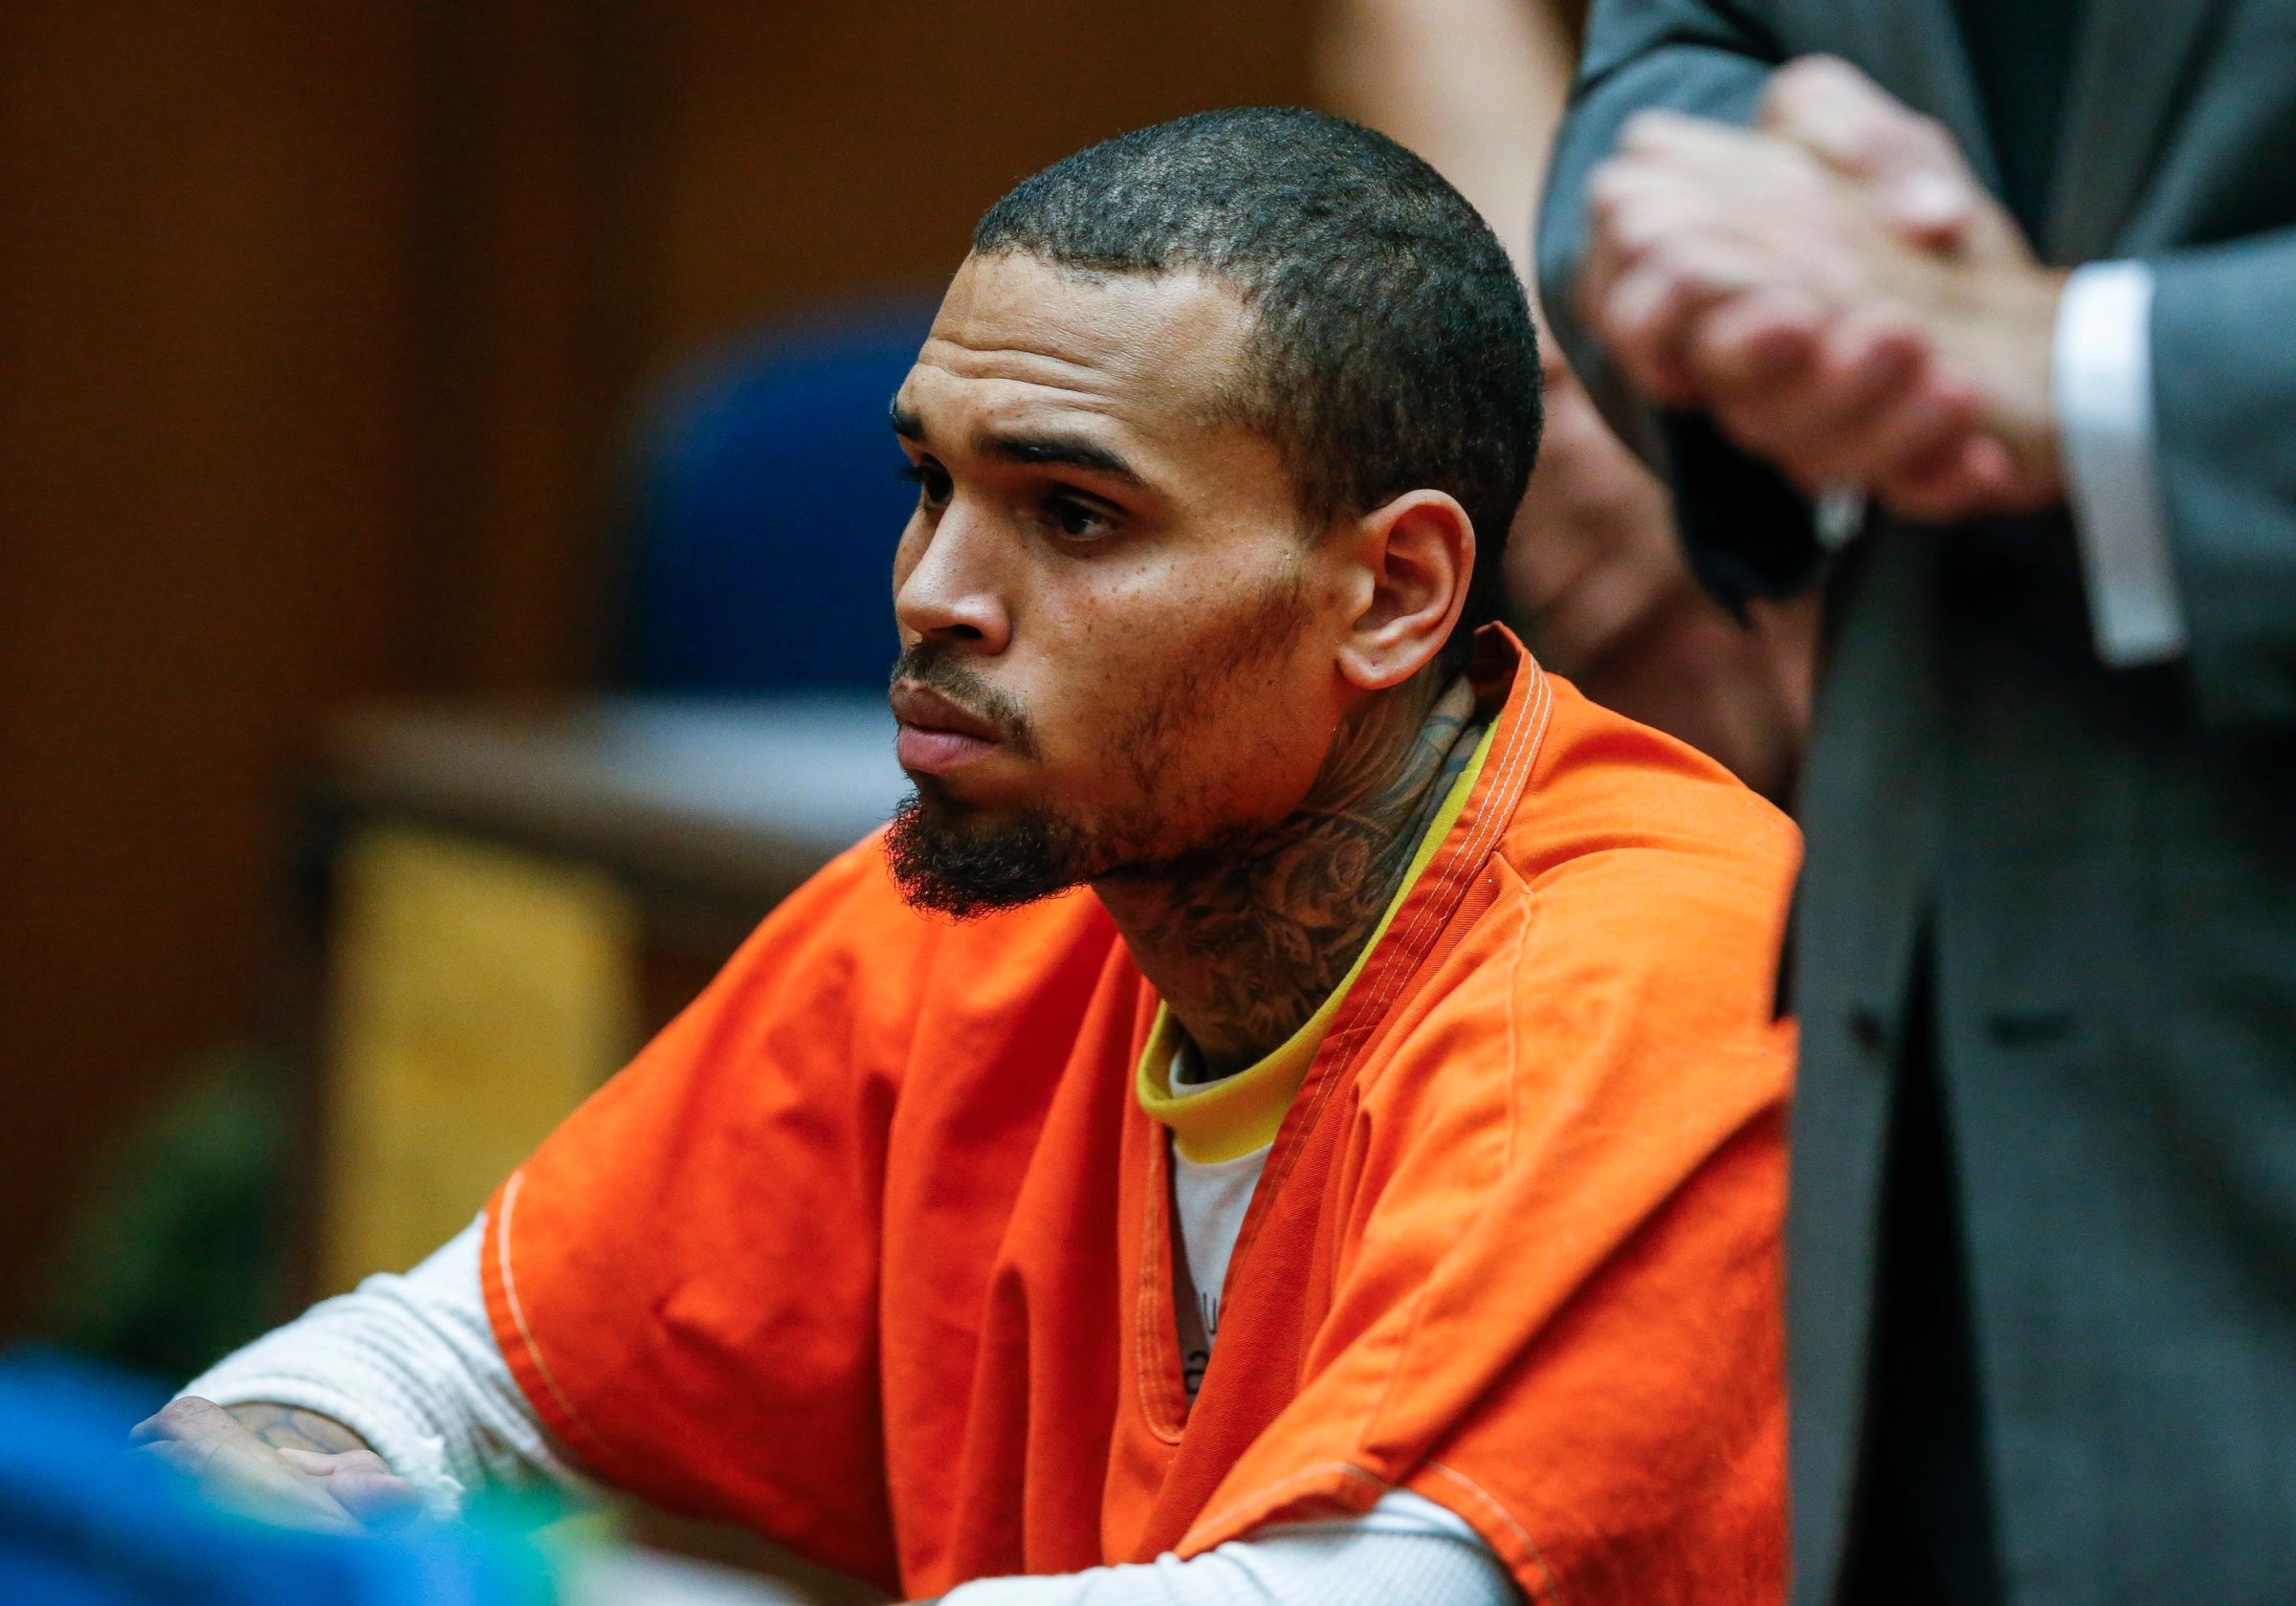 Chris Brown appears in Los Angeles Superior Court